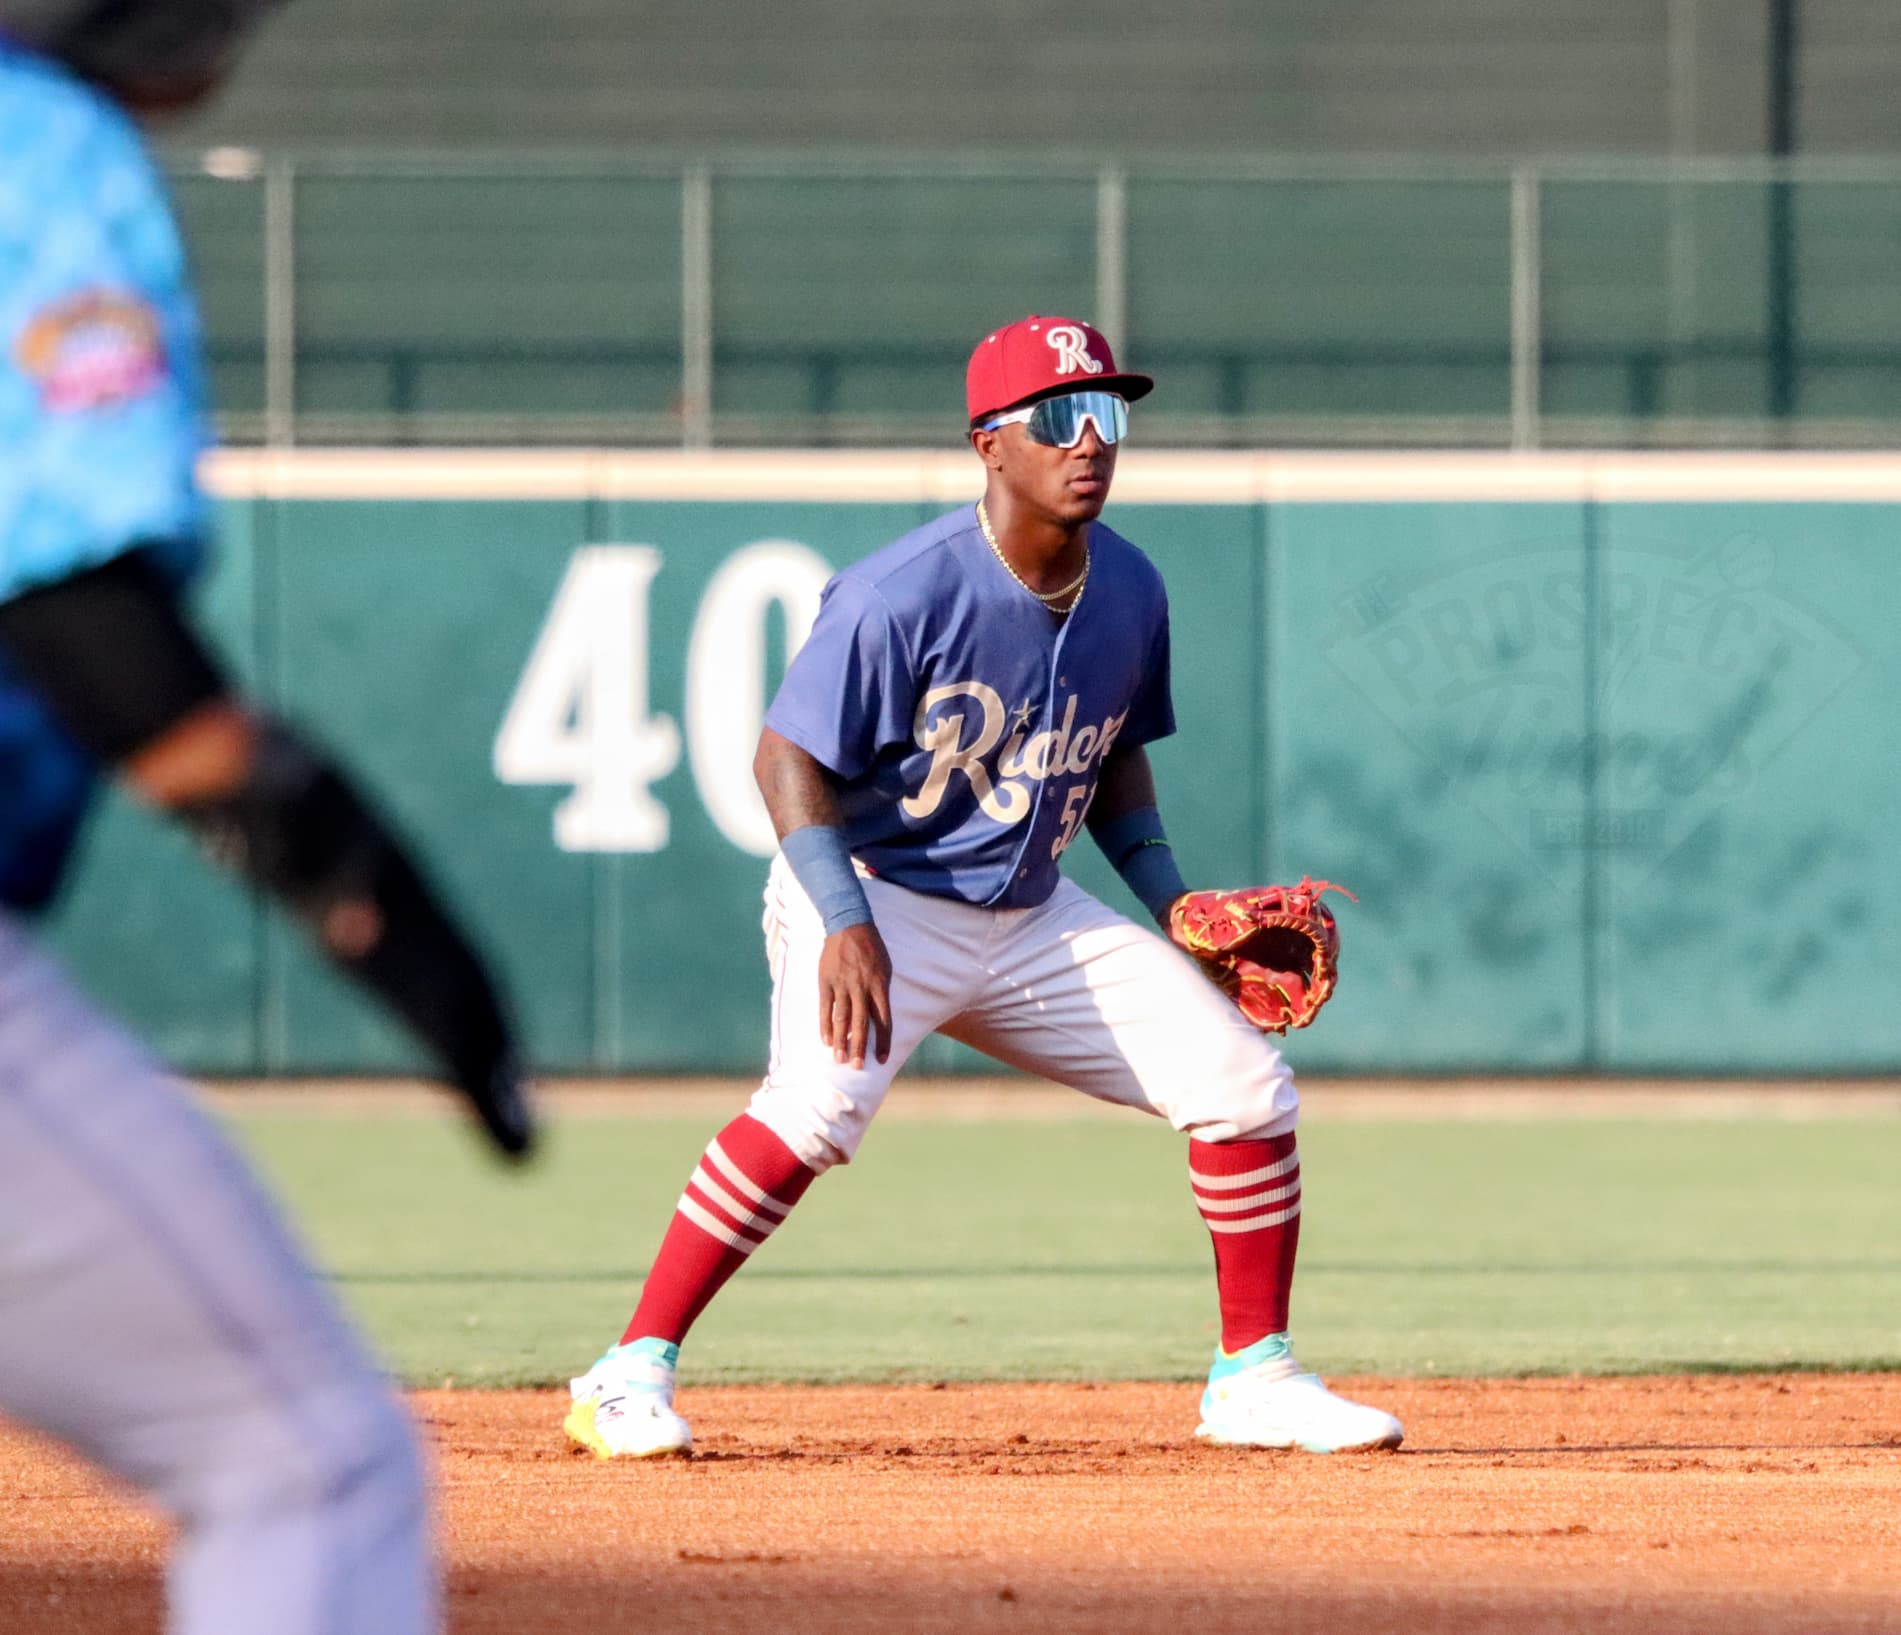 Luisangel Acuña: Small Is the New Mighty